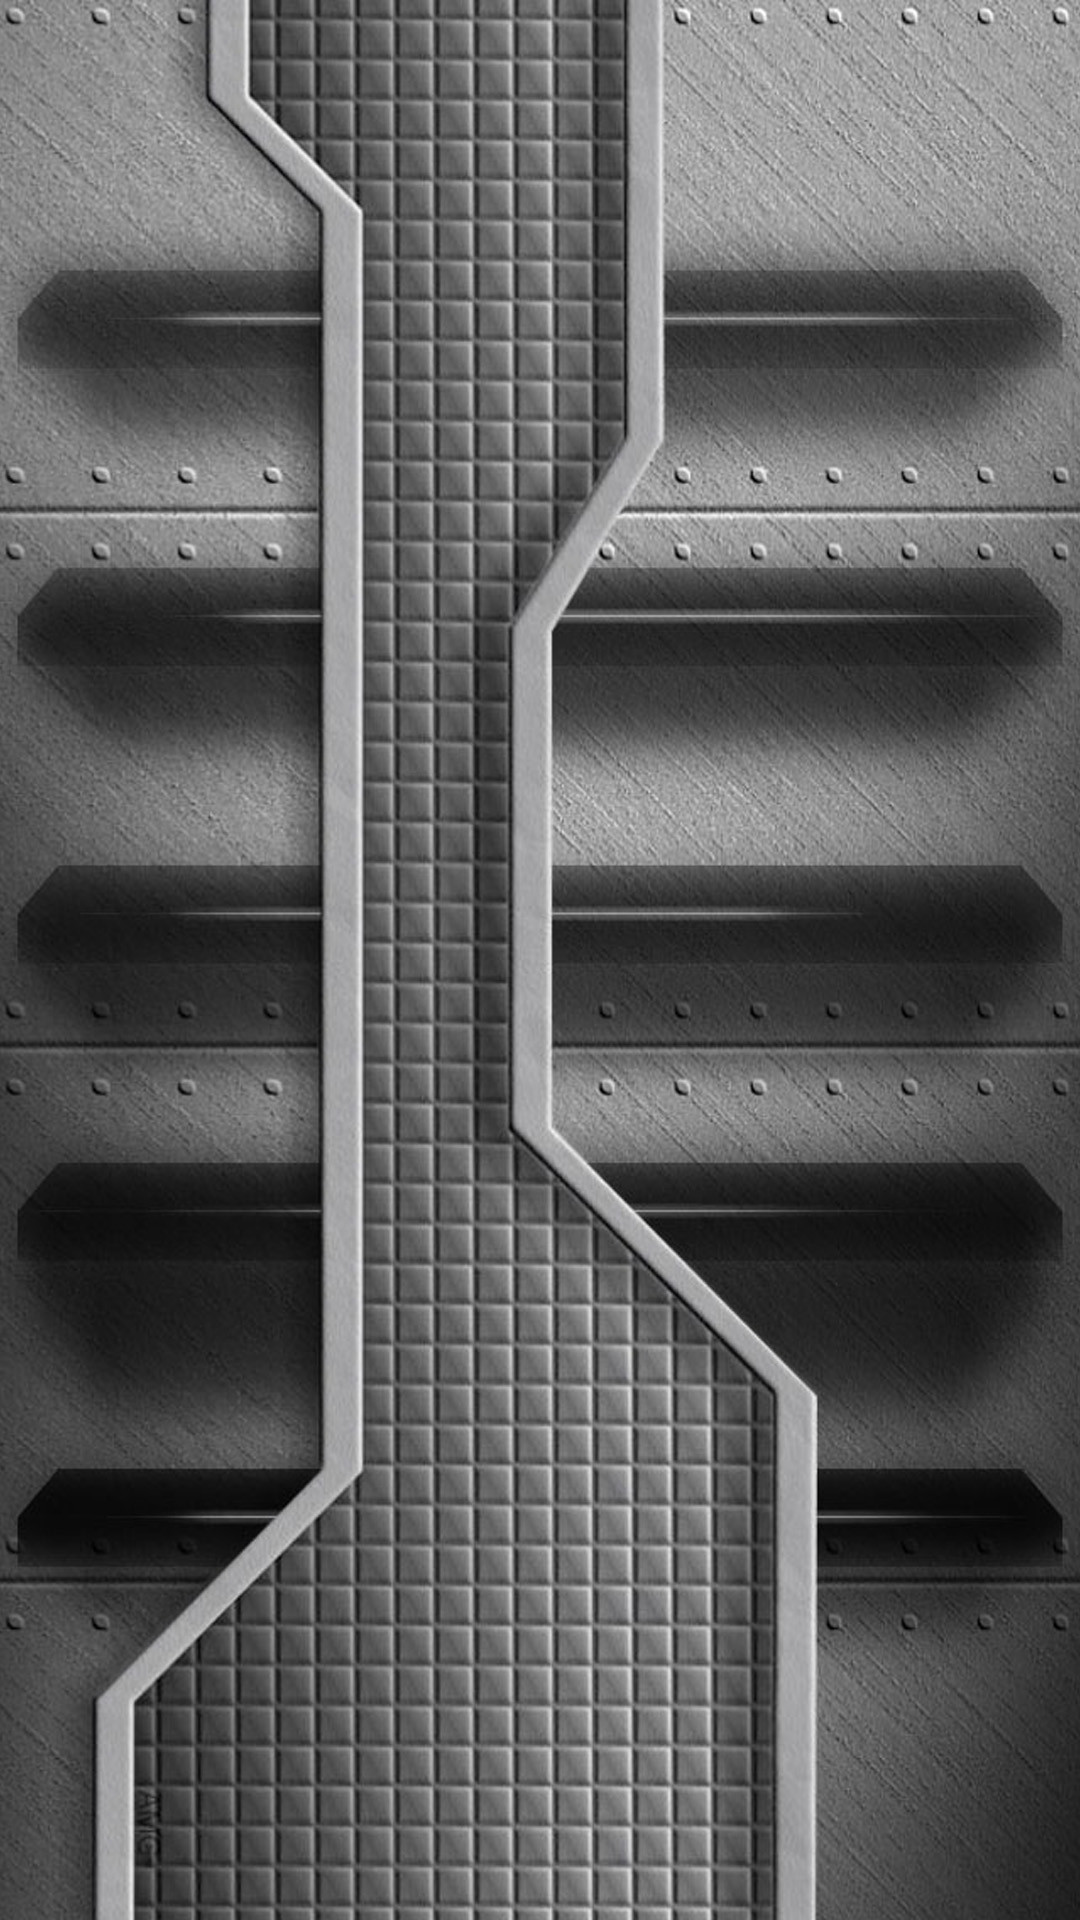 1080x1920 iPhone 6 Shelves - Bing images